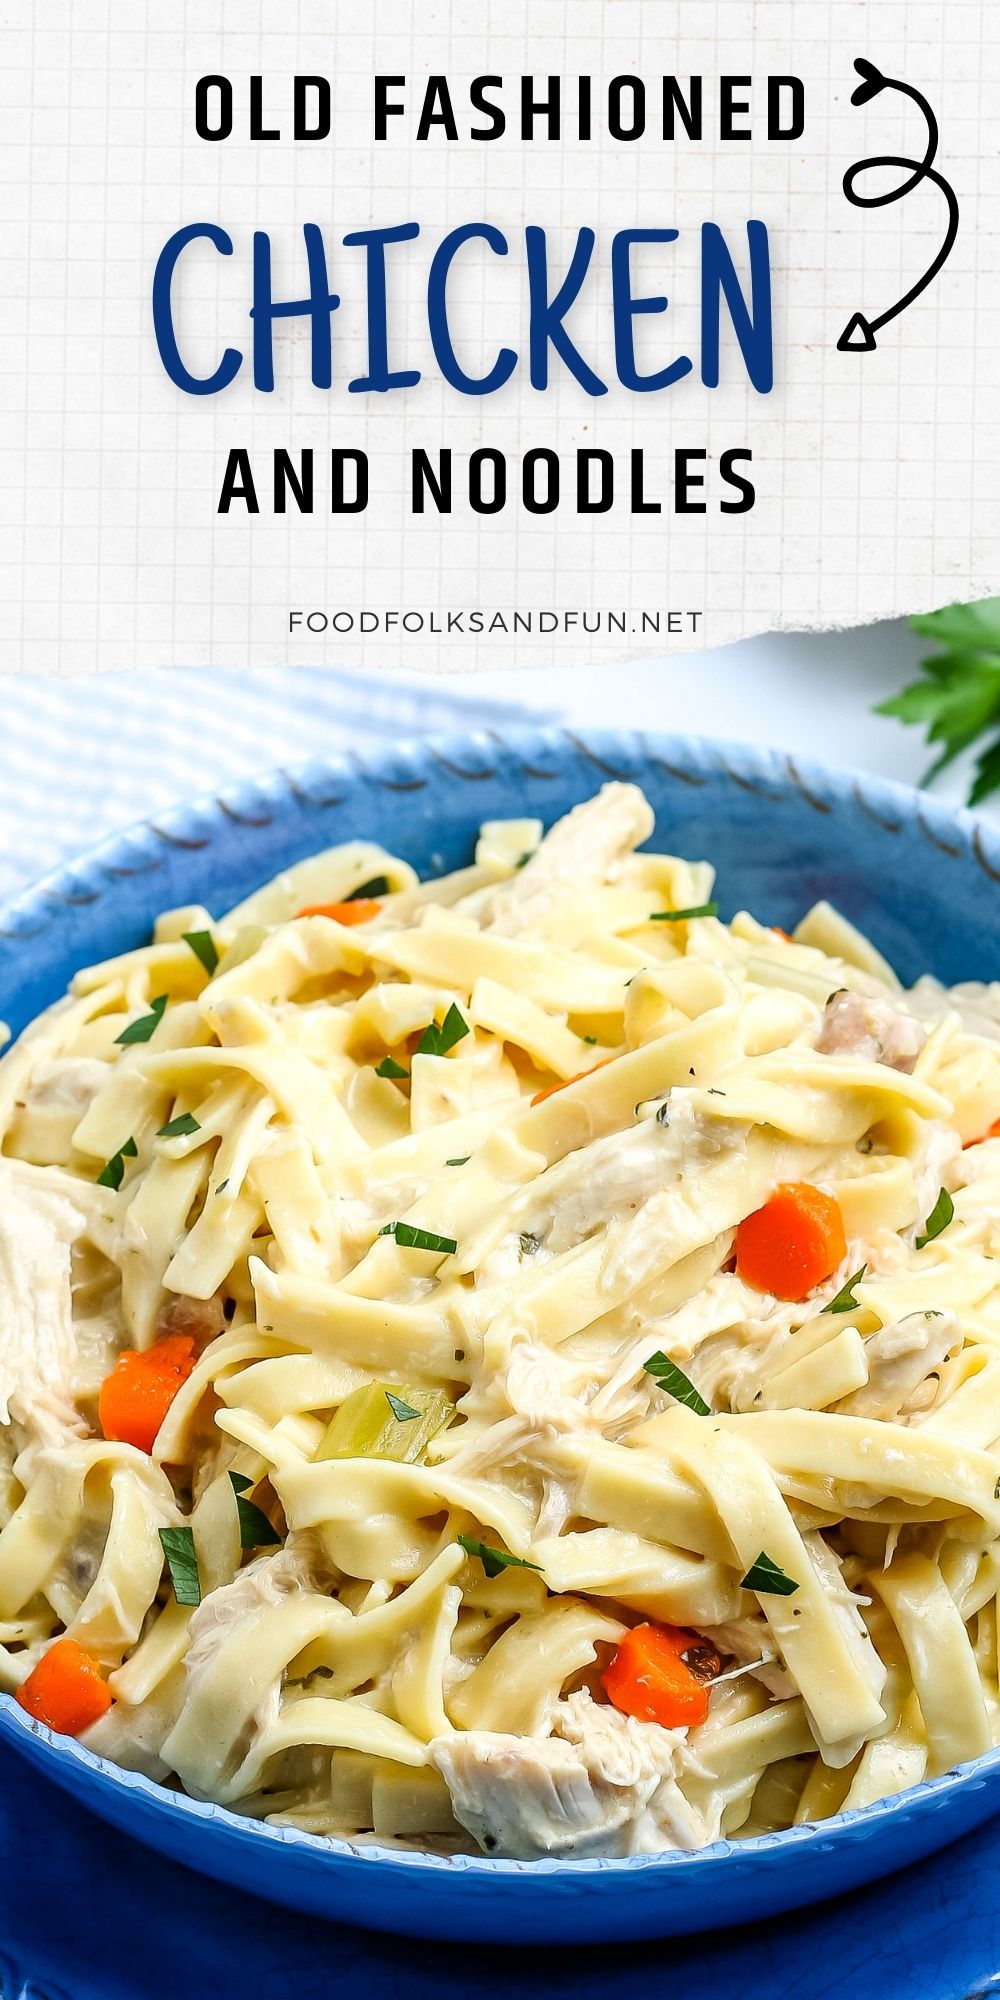 This Old Fashioned Chicken and Noodles recipe is a comfort food classic. It’s chock-full of egg noodles, tender chicken, veggies, and a creamy sauce.  via @foodfolksandfun